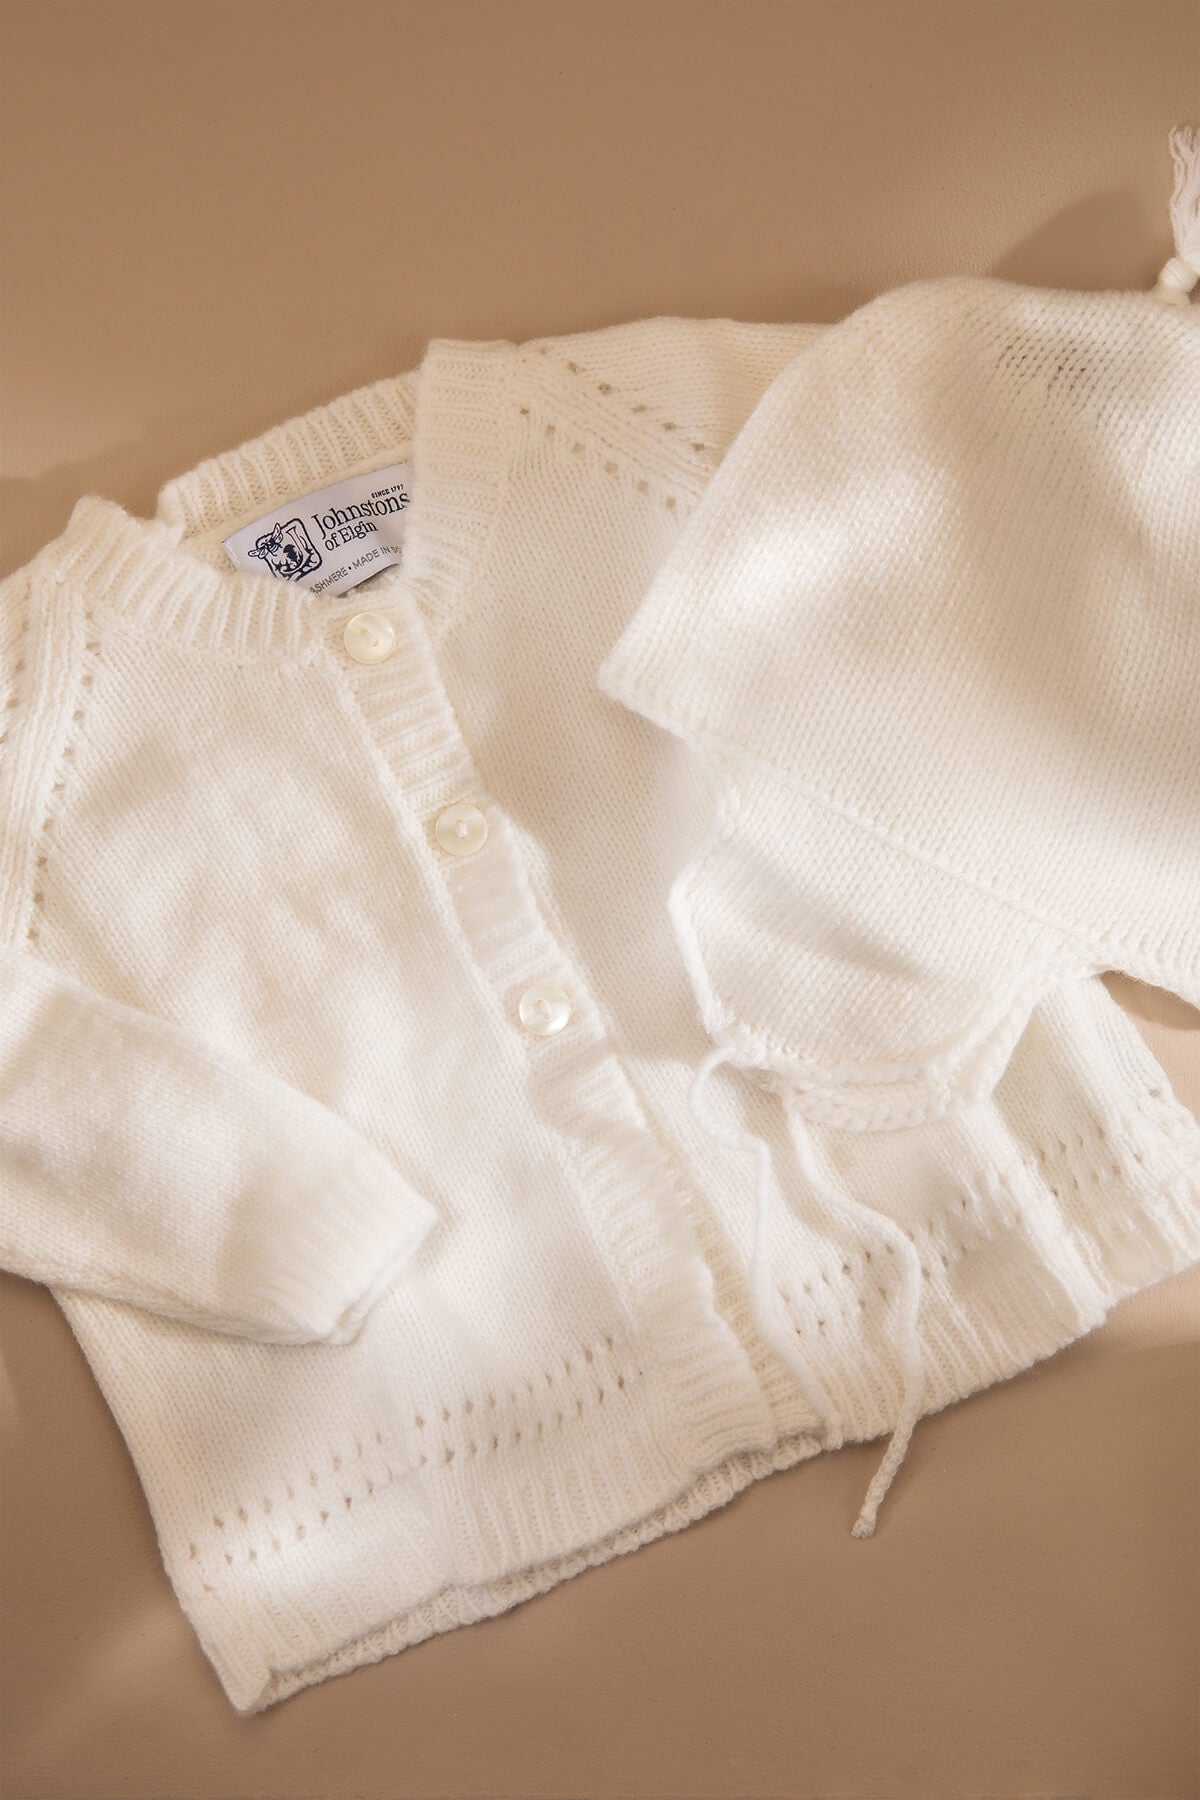 Johnstons of Elgin’s Baby's 1st Cashmere Cardigan Gift Set in Ecru on a beige background AW21GIFTSET19A